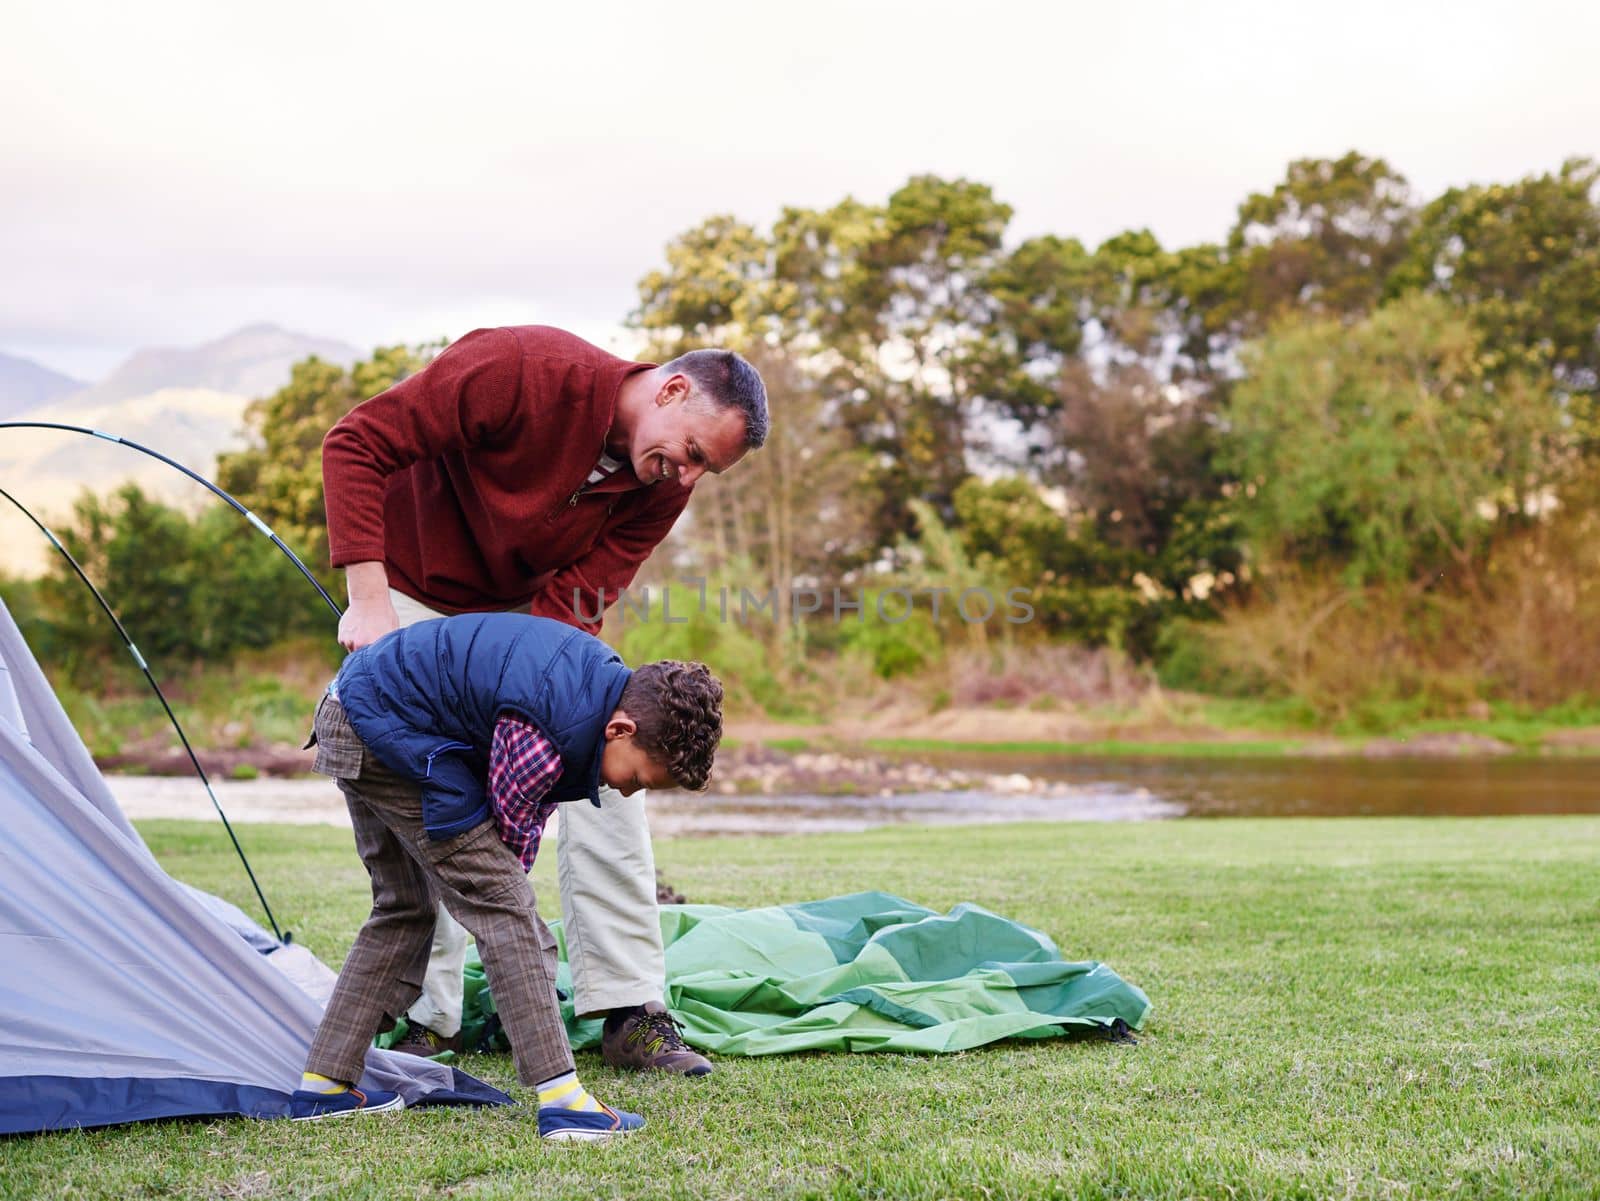 There you go. a father and son setting up a tent together while camping